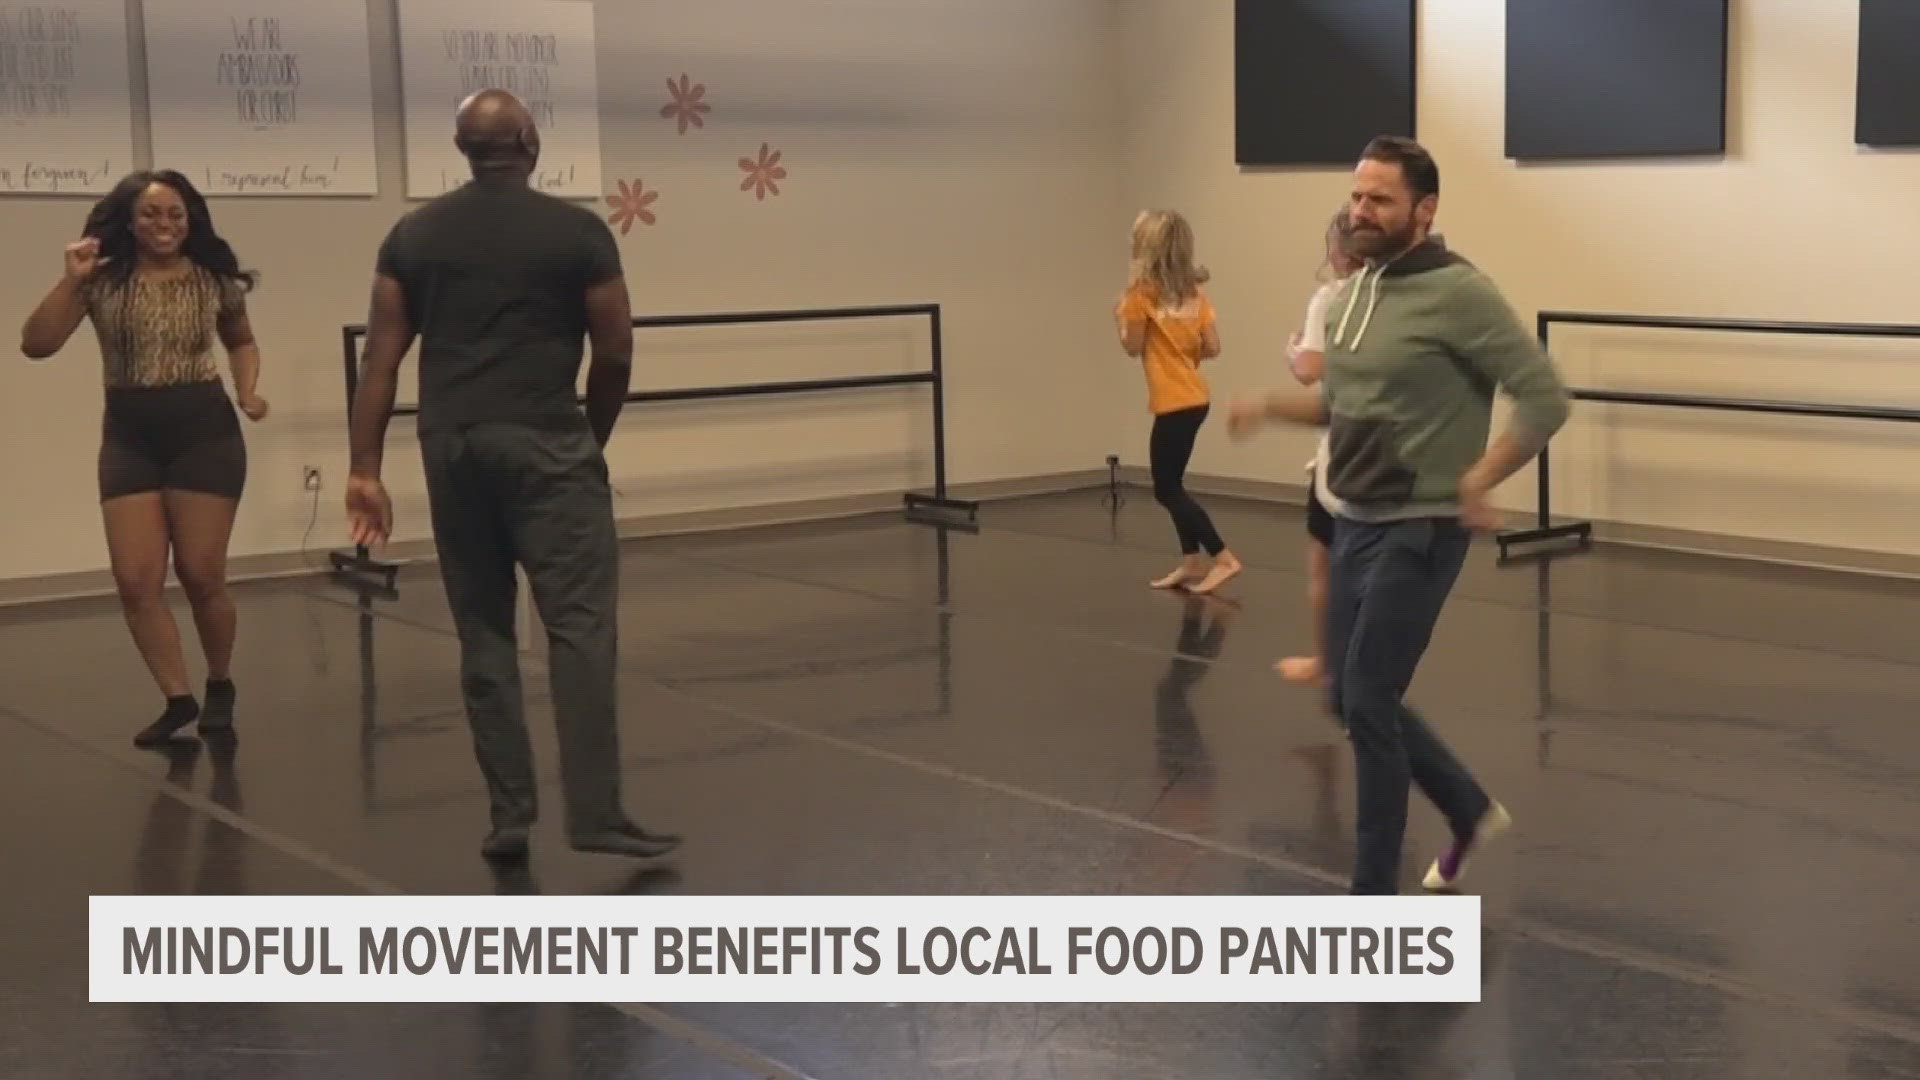 The event is raising money for Dancing with the Local Stars, which supports food pantries in West Michigan.